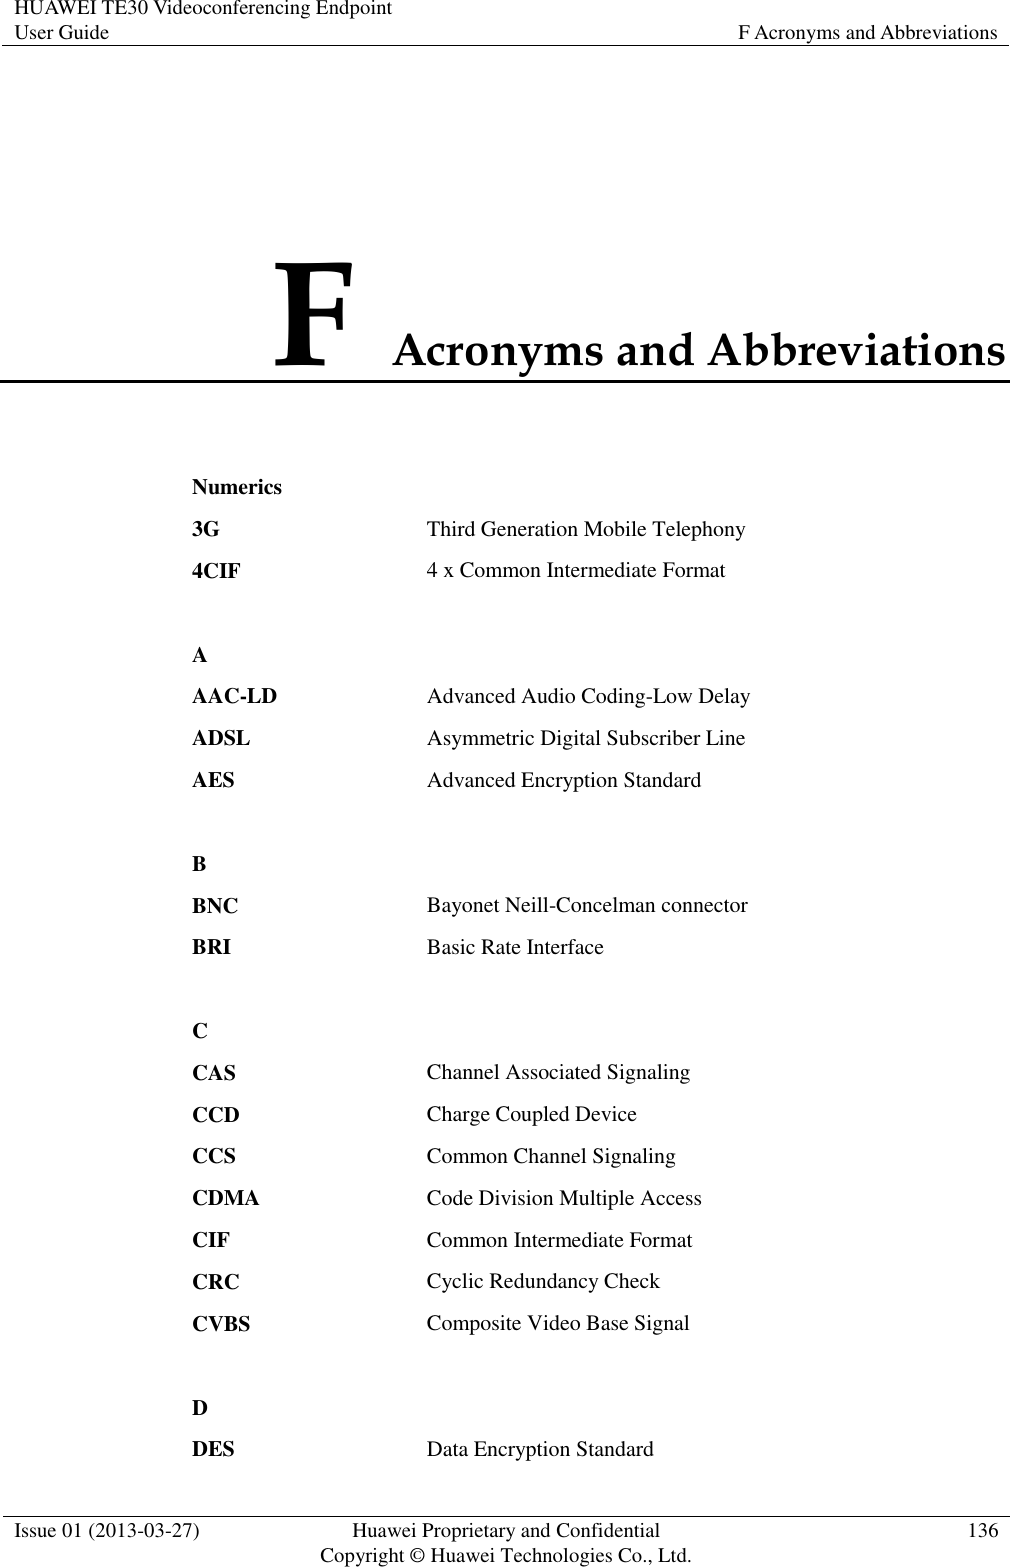 HUAWEI TE30 Videoconferencing Endpoint User Guide F Acronyms and Abbreviations  Issue 01 (2013-03-27) Huawei Proprietary and Confidential                                     Copyright © Huawei Technologies Co., Ltd. 136  F Acronyms and Abbreviations Numerics  3G Third Generation Mobile Telephony 4CIF 4 x Common Intermediate Format   A  AAC-LD Advanced Audio Coding-Low Delay ADSL Asymmetric Digital Subscriber Line AES Advanced Encryption Standard   B  BNC Bayonet Neill-Concelman connector BRI Basic Rate Interface   C  CAS Channel Associated Signaling CCD Charge Coupled Device CCS Common Channel Signaling CDMA Code Division Multiple Access CIF Common Intermediate Format CRC Cyclic Redundancy Check CVBS Composite Video Base Signal   D  DES Data Encryption Standard 